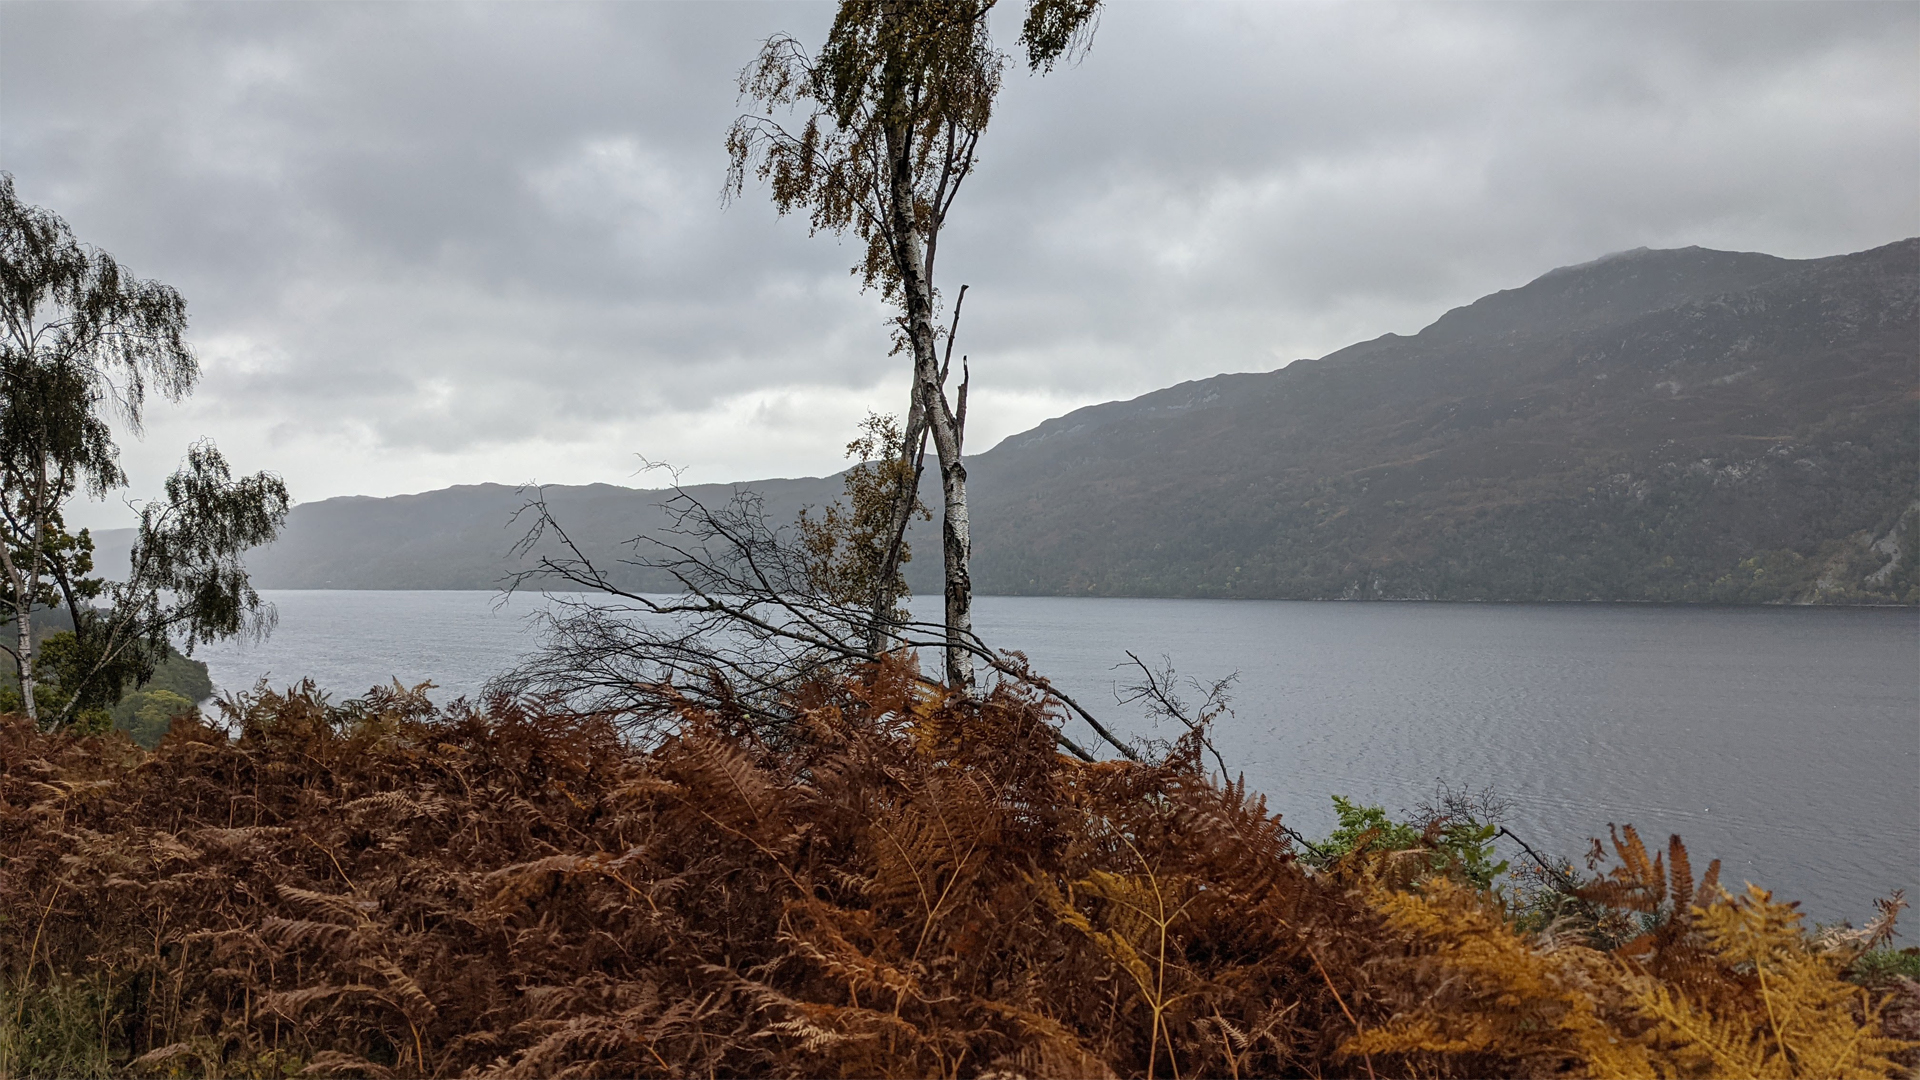 A beautiful view over Loch Ness on the Great Glen Way